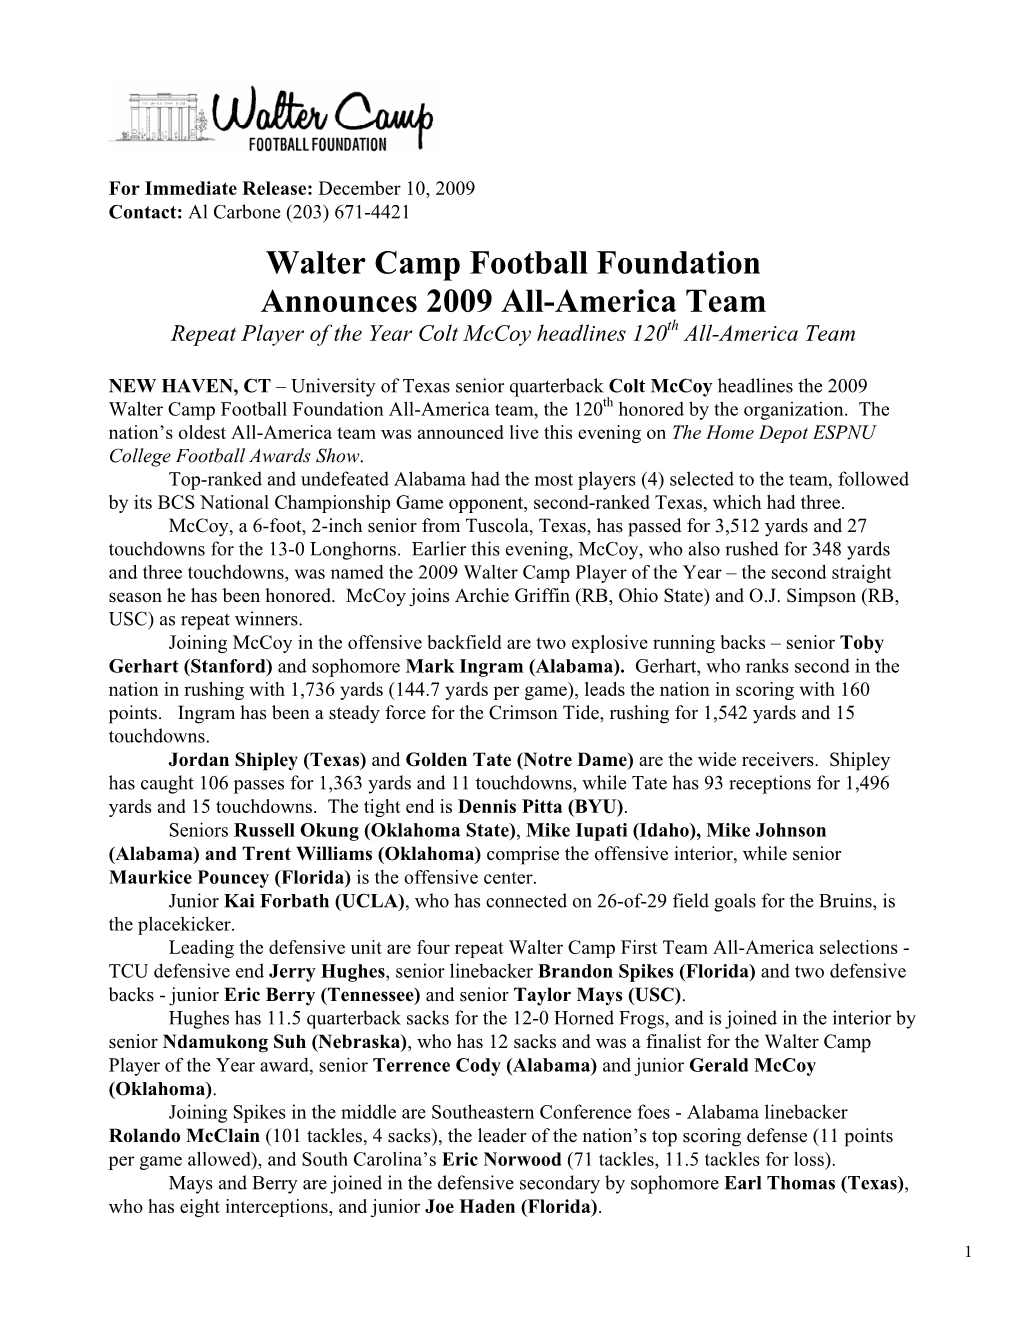 Walter Camp Football Foundation Announces 2009 All-America Team Repeat Player of the Year Colt Mccoy Headlines 120Th All-America Team